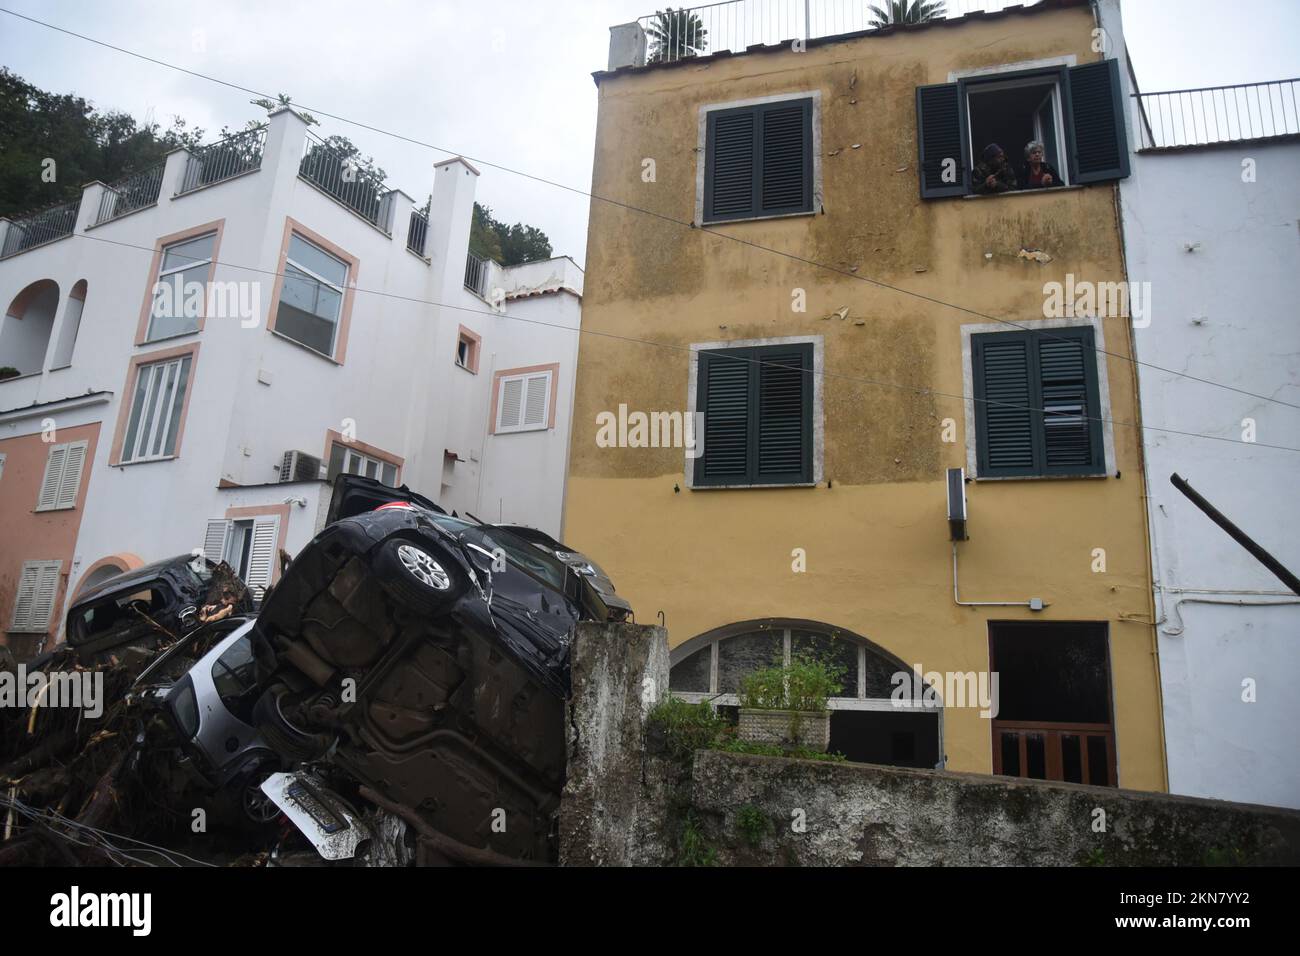 Casamicciola, common of Ischia island have been hit by landslide due to heavy rains, at moment one have been find in the mud the body women, while and twelve persons are missing, while the rescuers continues dig. (Photo by Pasquale Gargano/Pacific Press) Credit: Pacific Press Media Production Corp./Alamy Live News Stock Photo